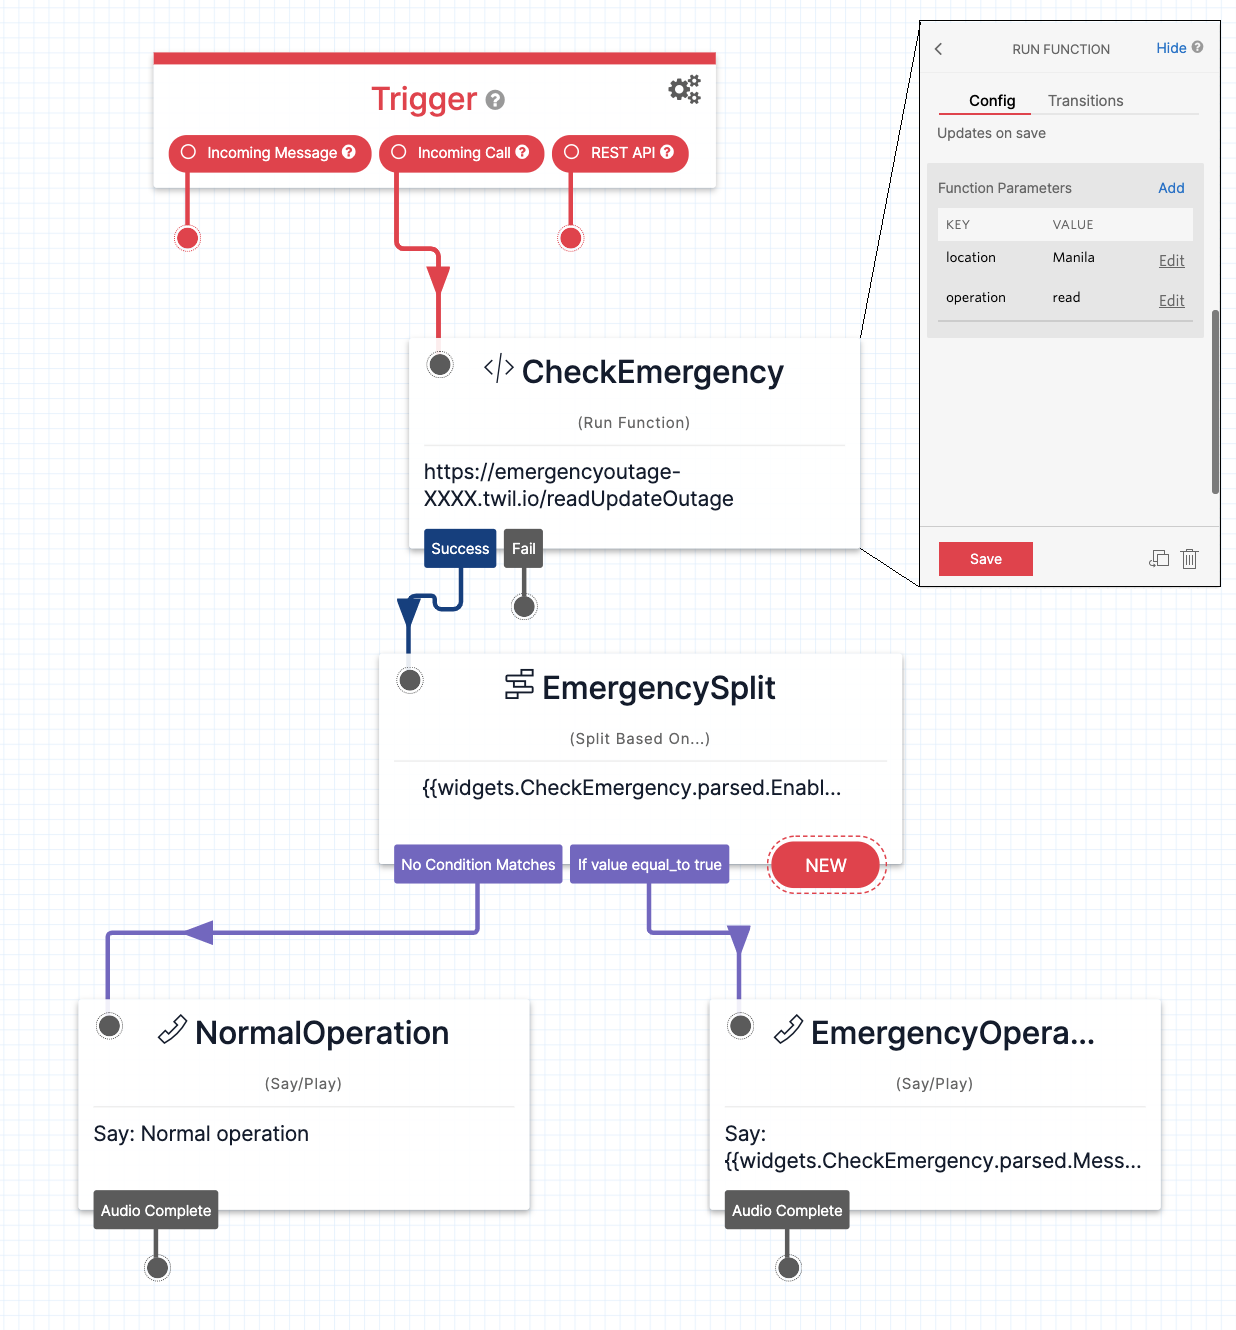 An image of the emergency outage demo flow